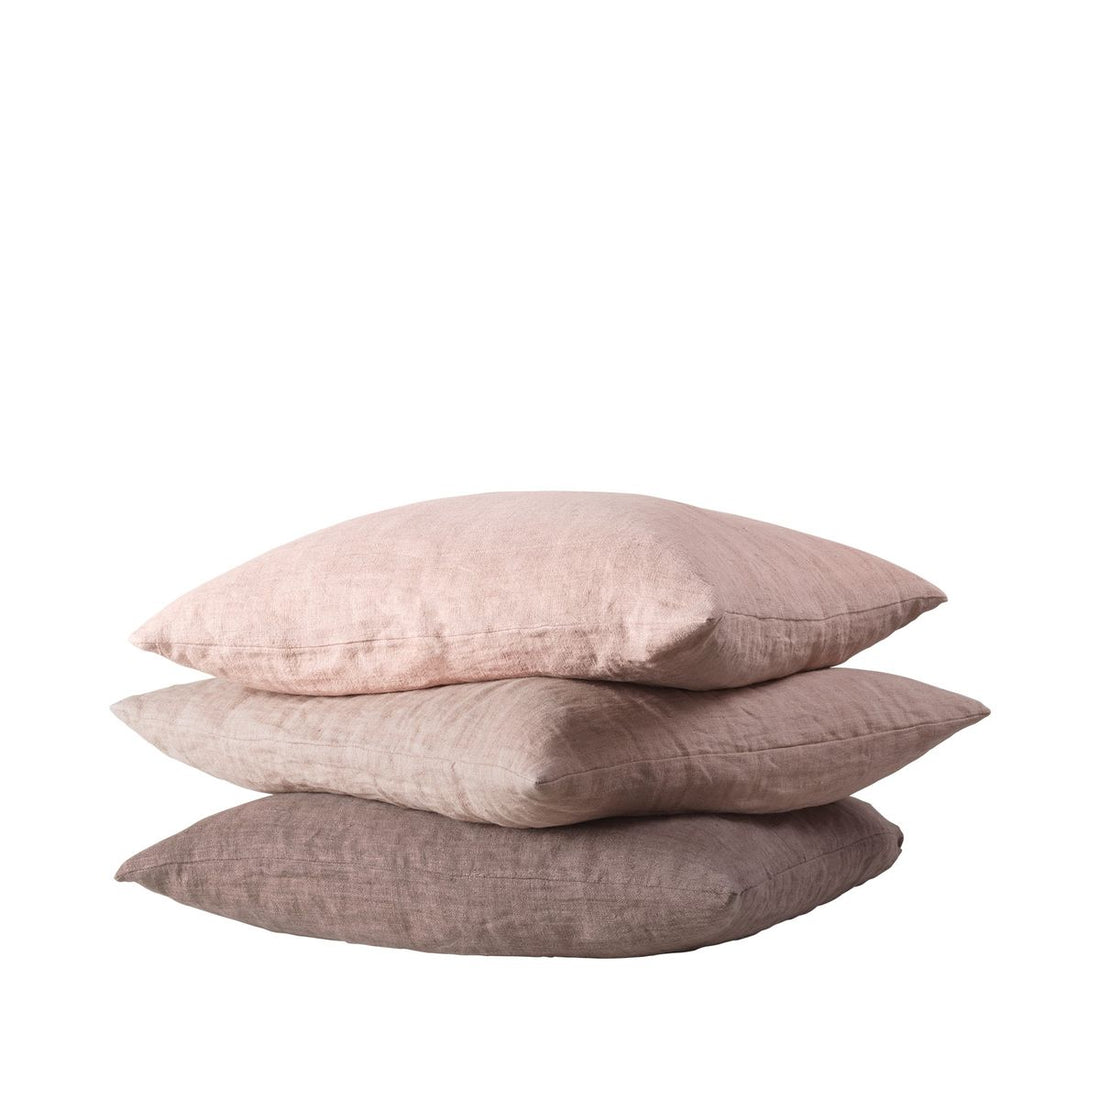 Cozy Living Luxury Linen Cushion Cover Mix